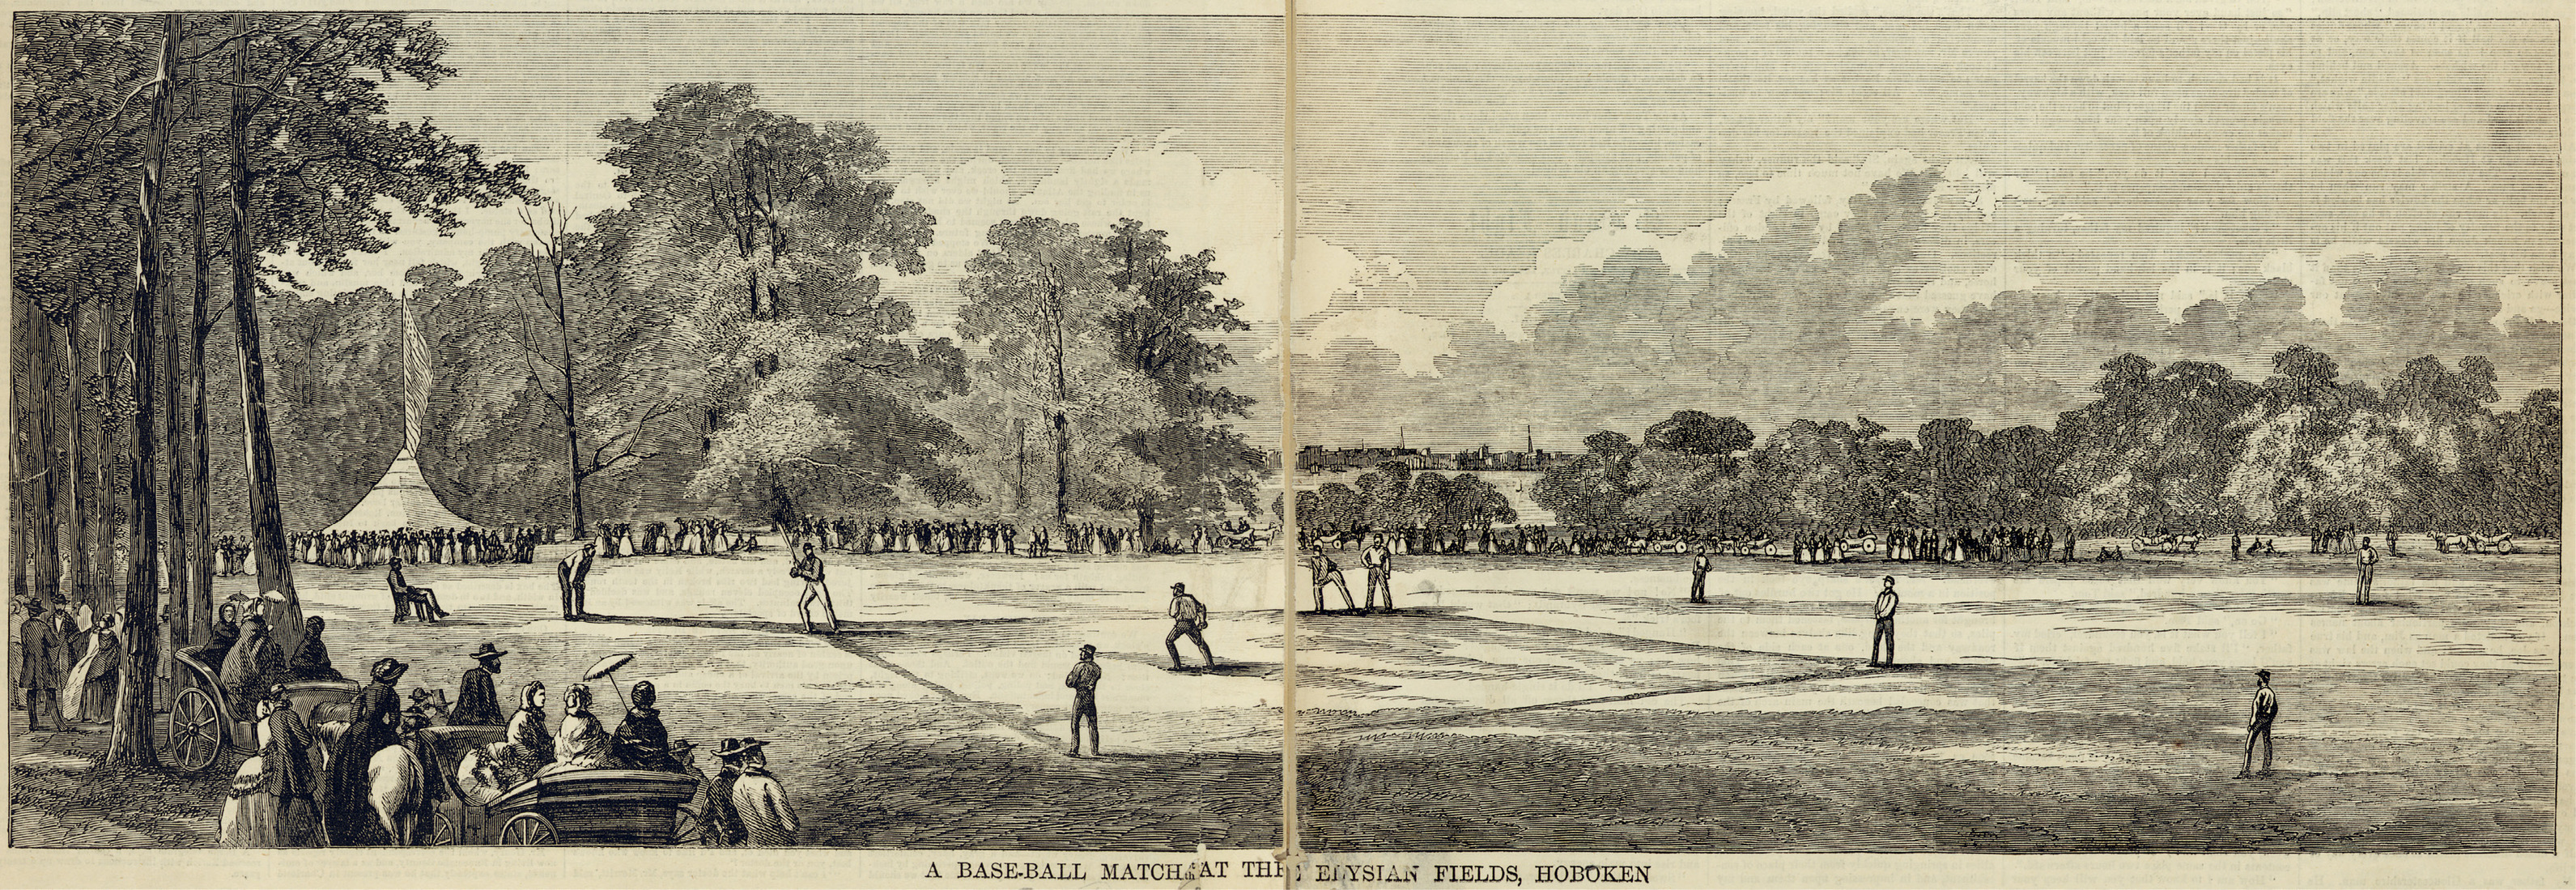 A baseball match at Elysian Fields Hoboken New Jersey 1859 THIS IS A - photo 2